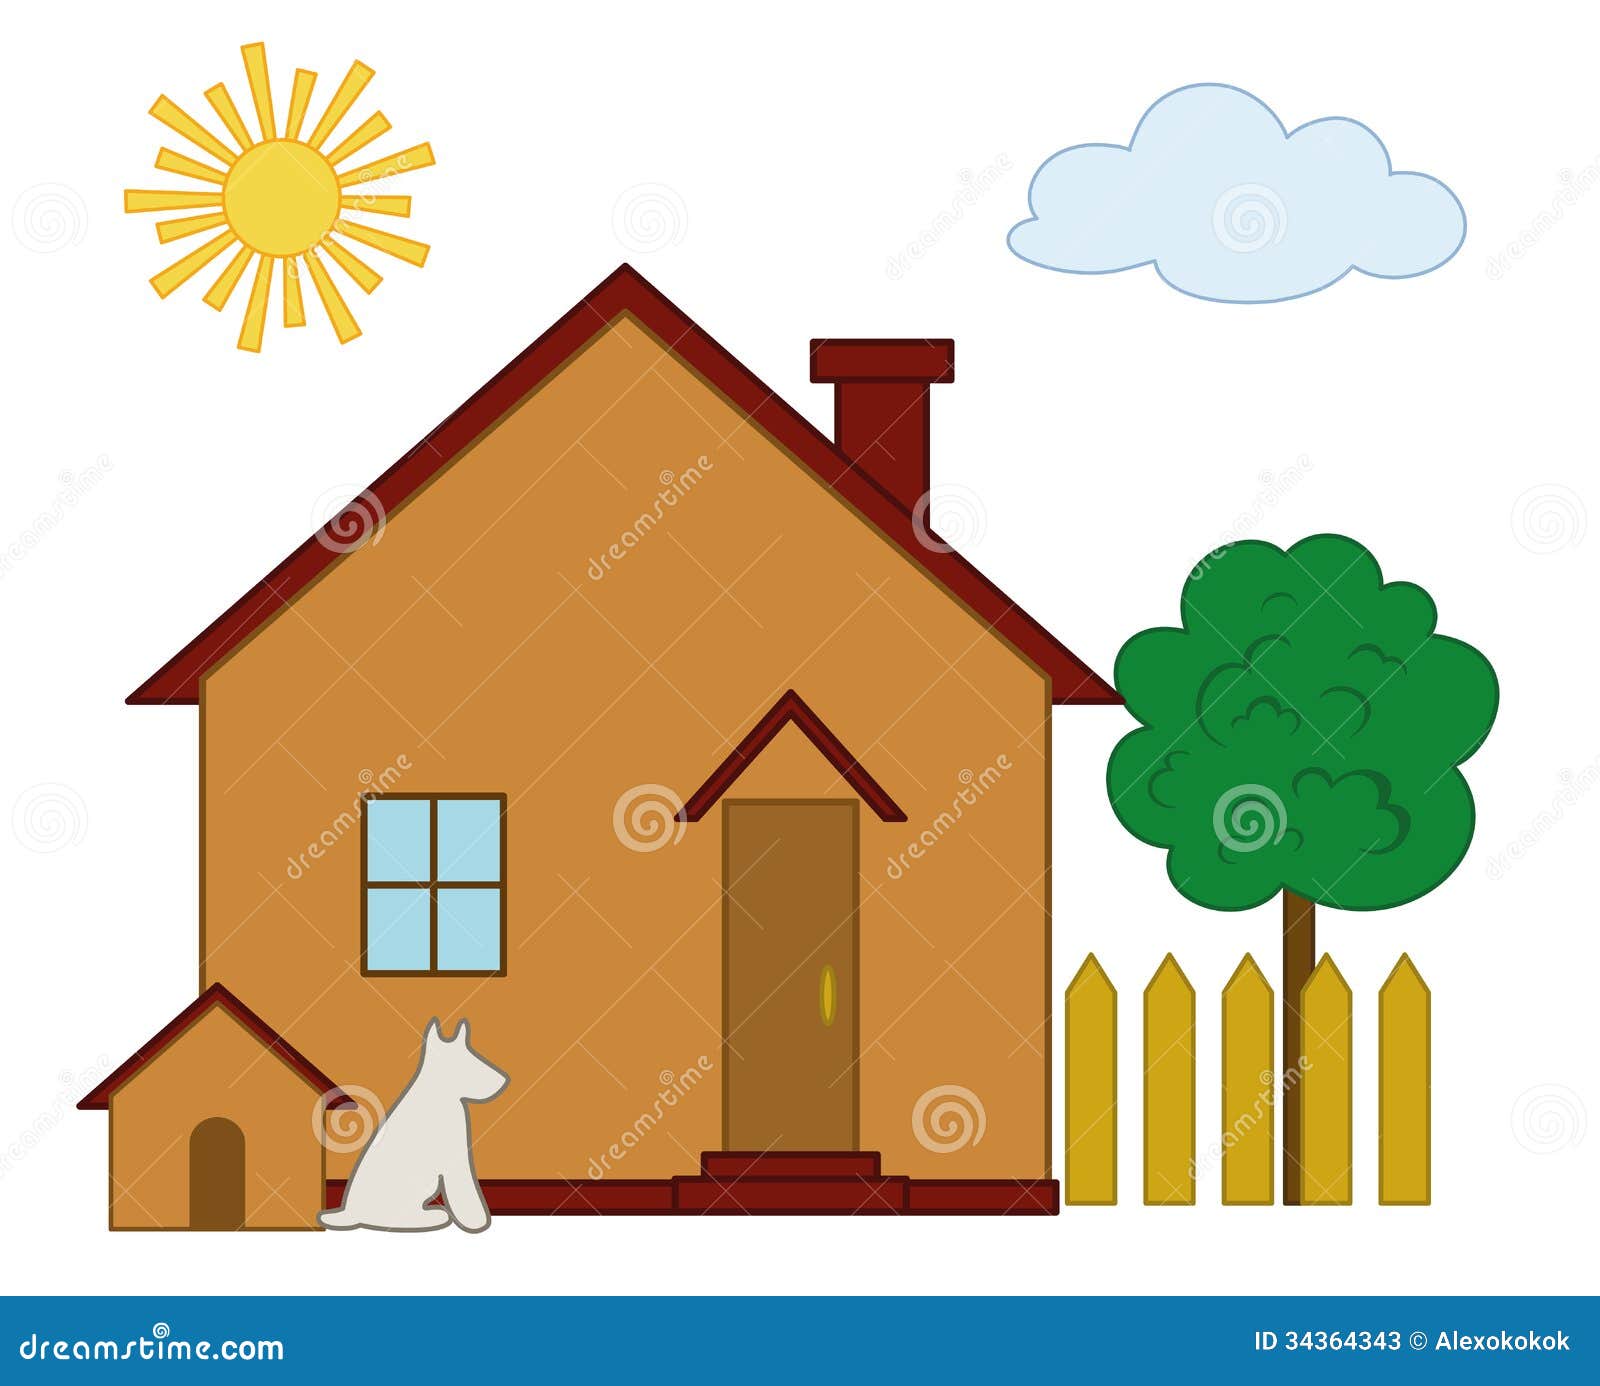 house and home clipart - photo #35